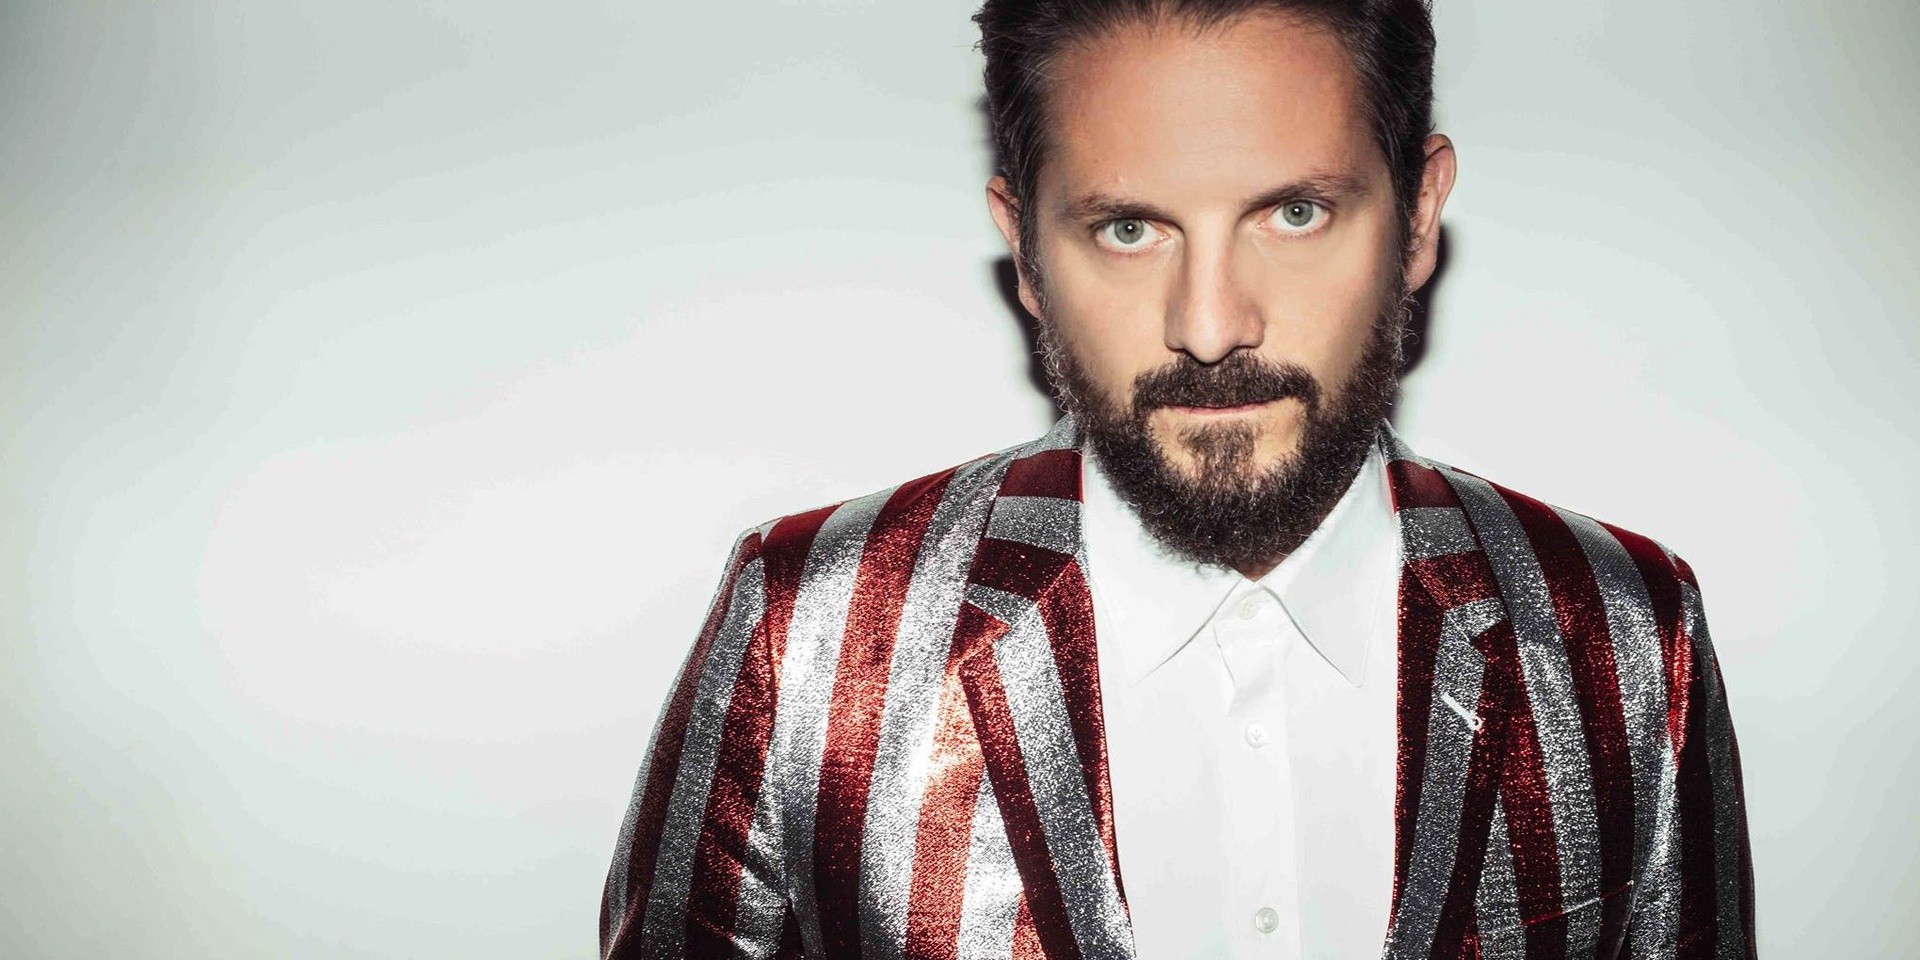 The Magician's greatest secret? Never divide music by genres